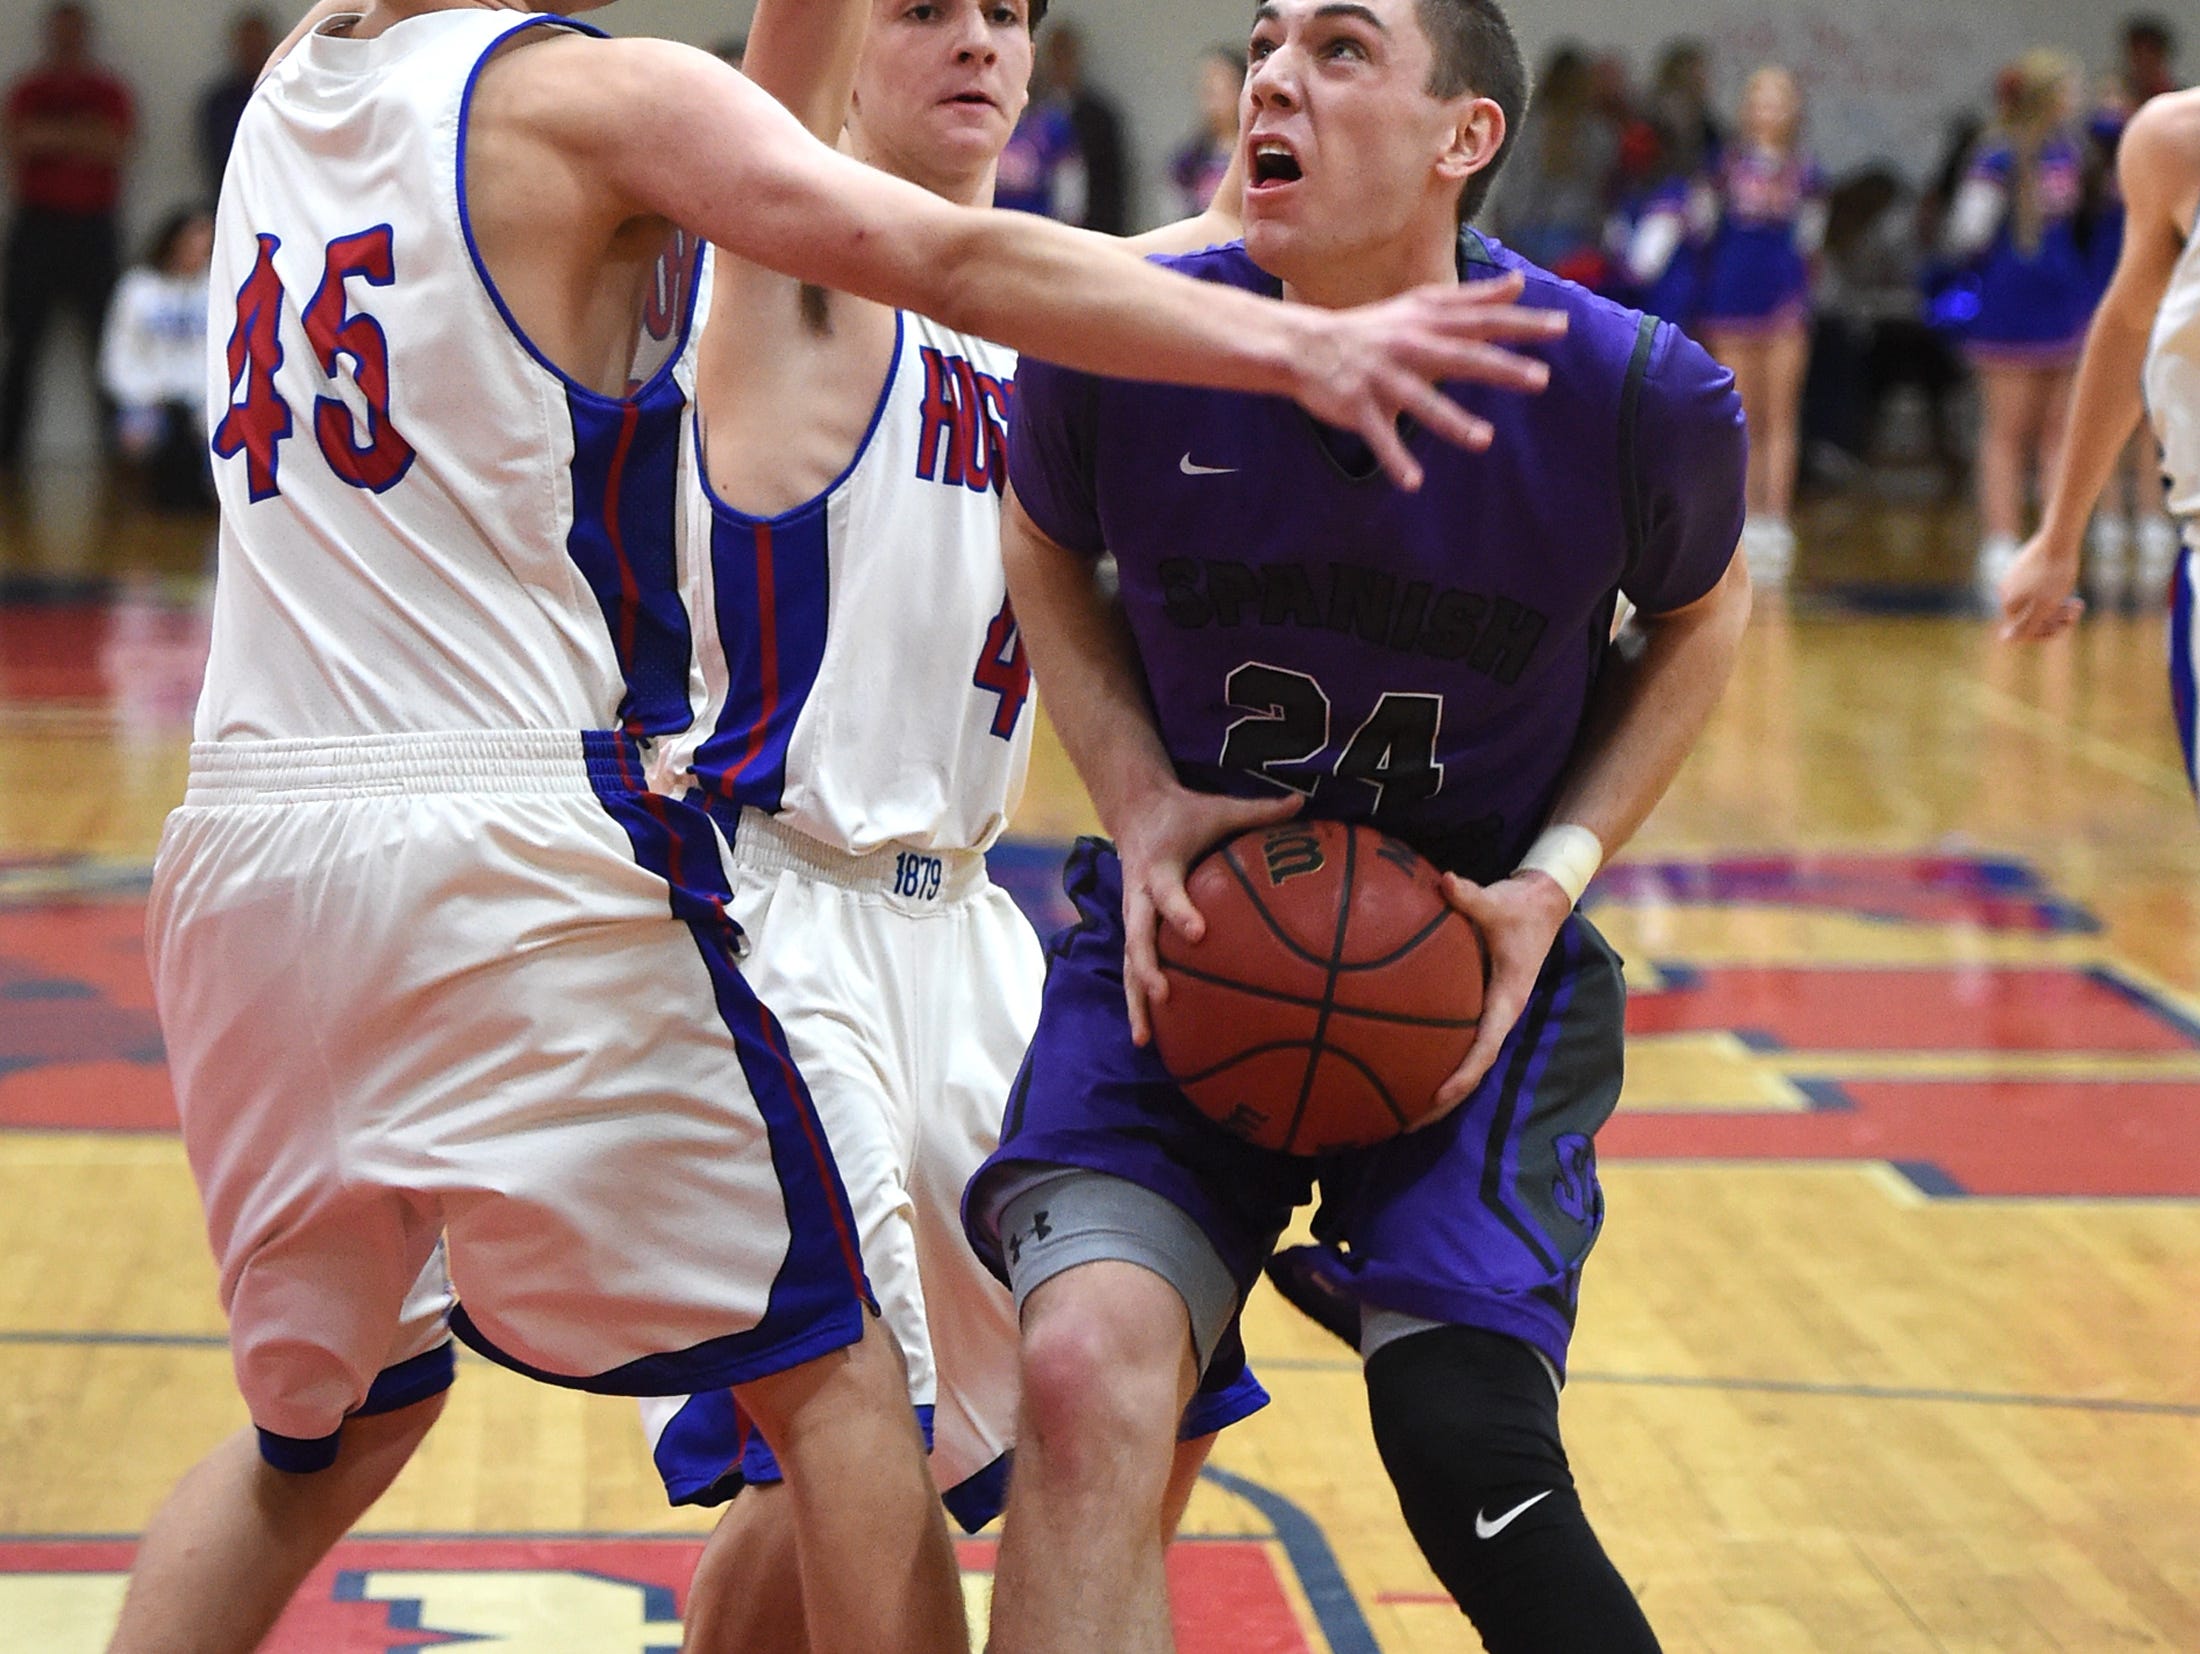 Spanish Springs' Josh Prizina looks to shoot with Reno's Thomas Beach (45) and Kyle Rose (4) guarding him on Feb. 7. Spanish Springs hosts Douglas on Tuesday and Carson is at Reno in quarterfinal games of the Northern 4A Regional tournament.